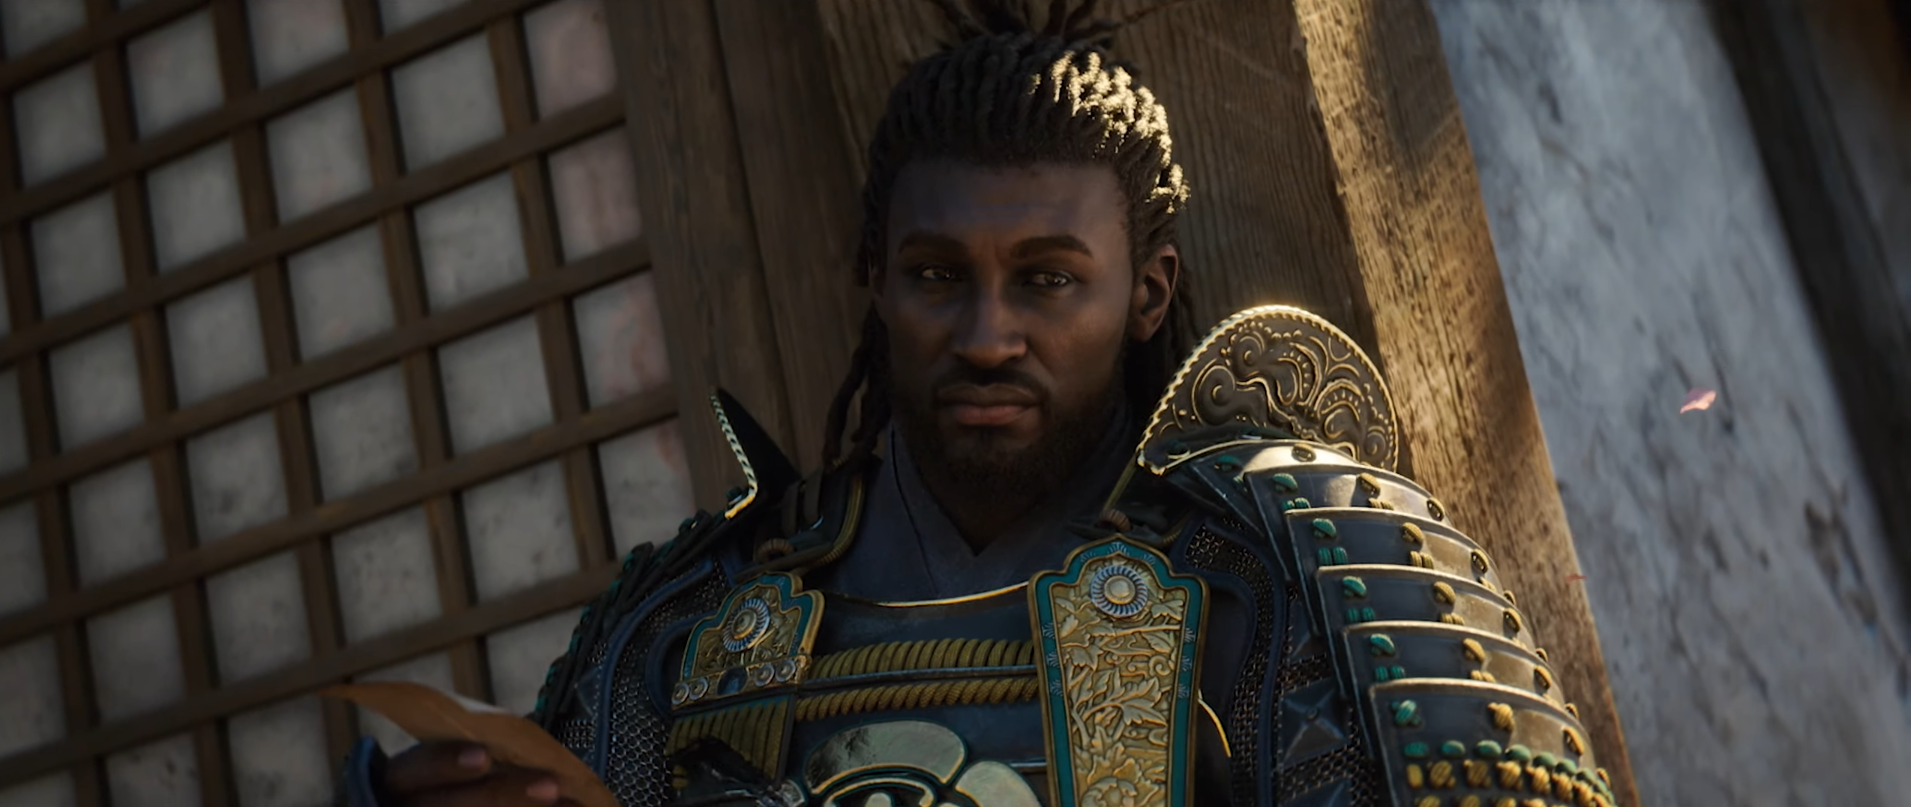 yasuke as depicted in the trailer for Assassin's Creed Shadows